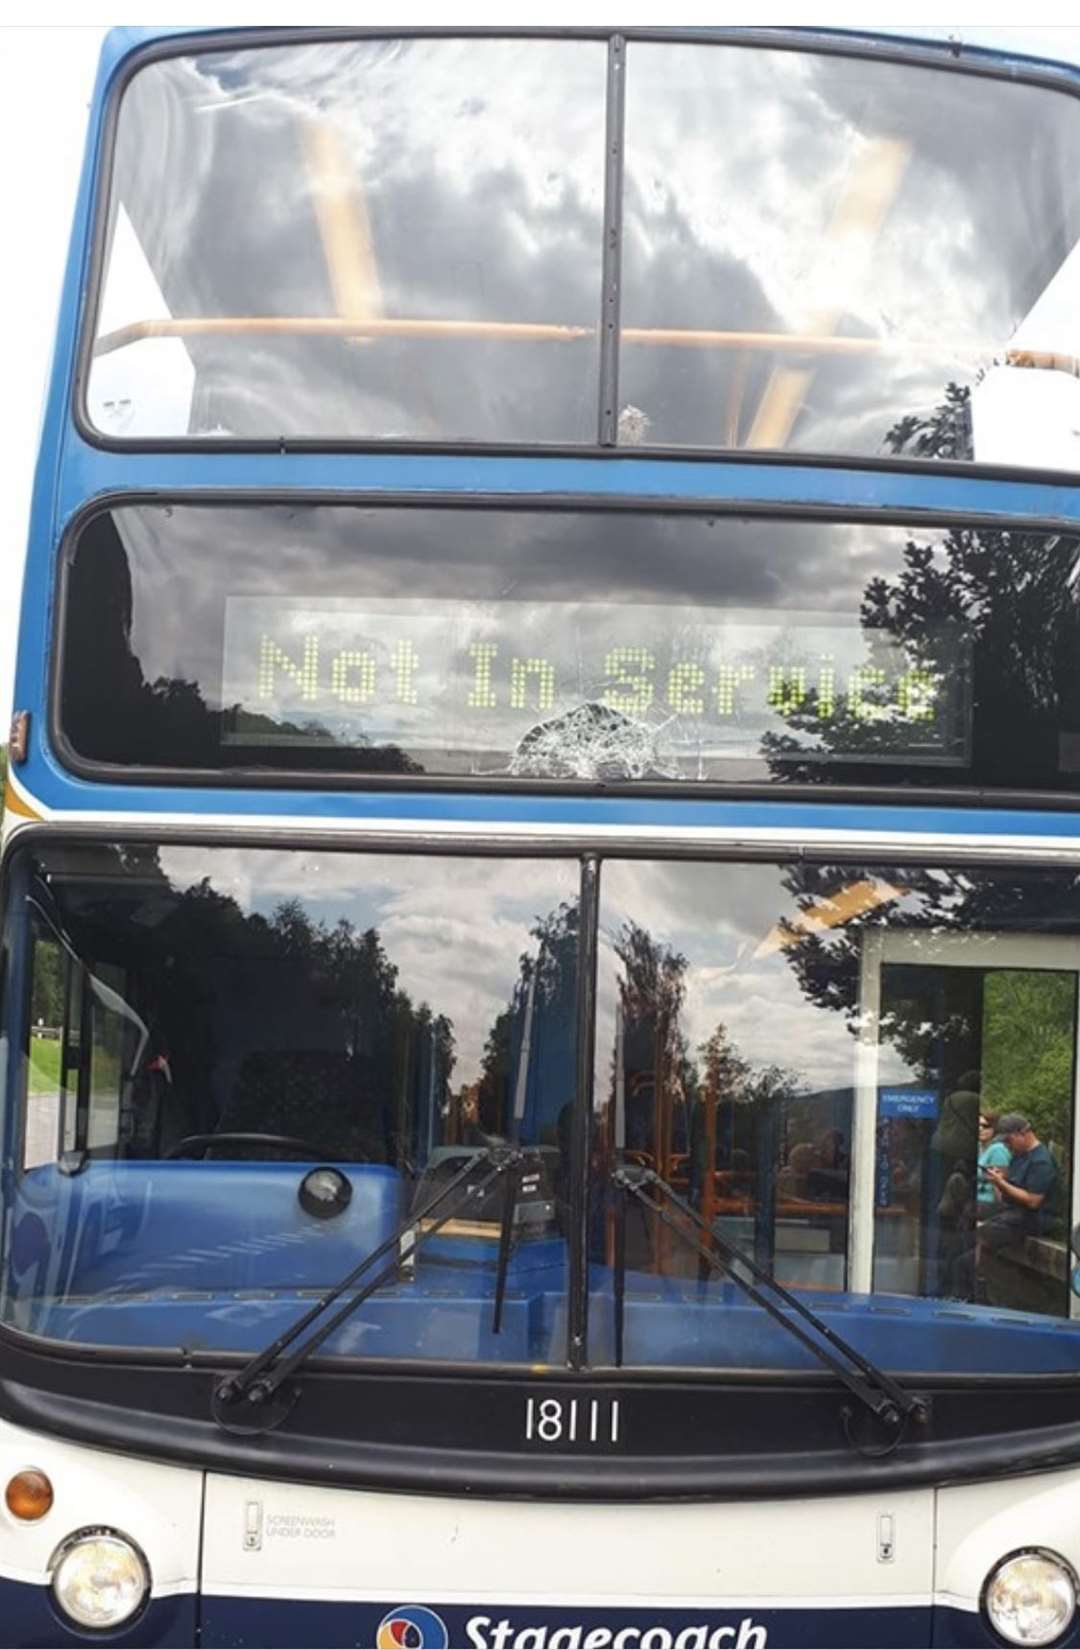 Damage to the front of a Stagecoach bus after a drone collided with it.